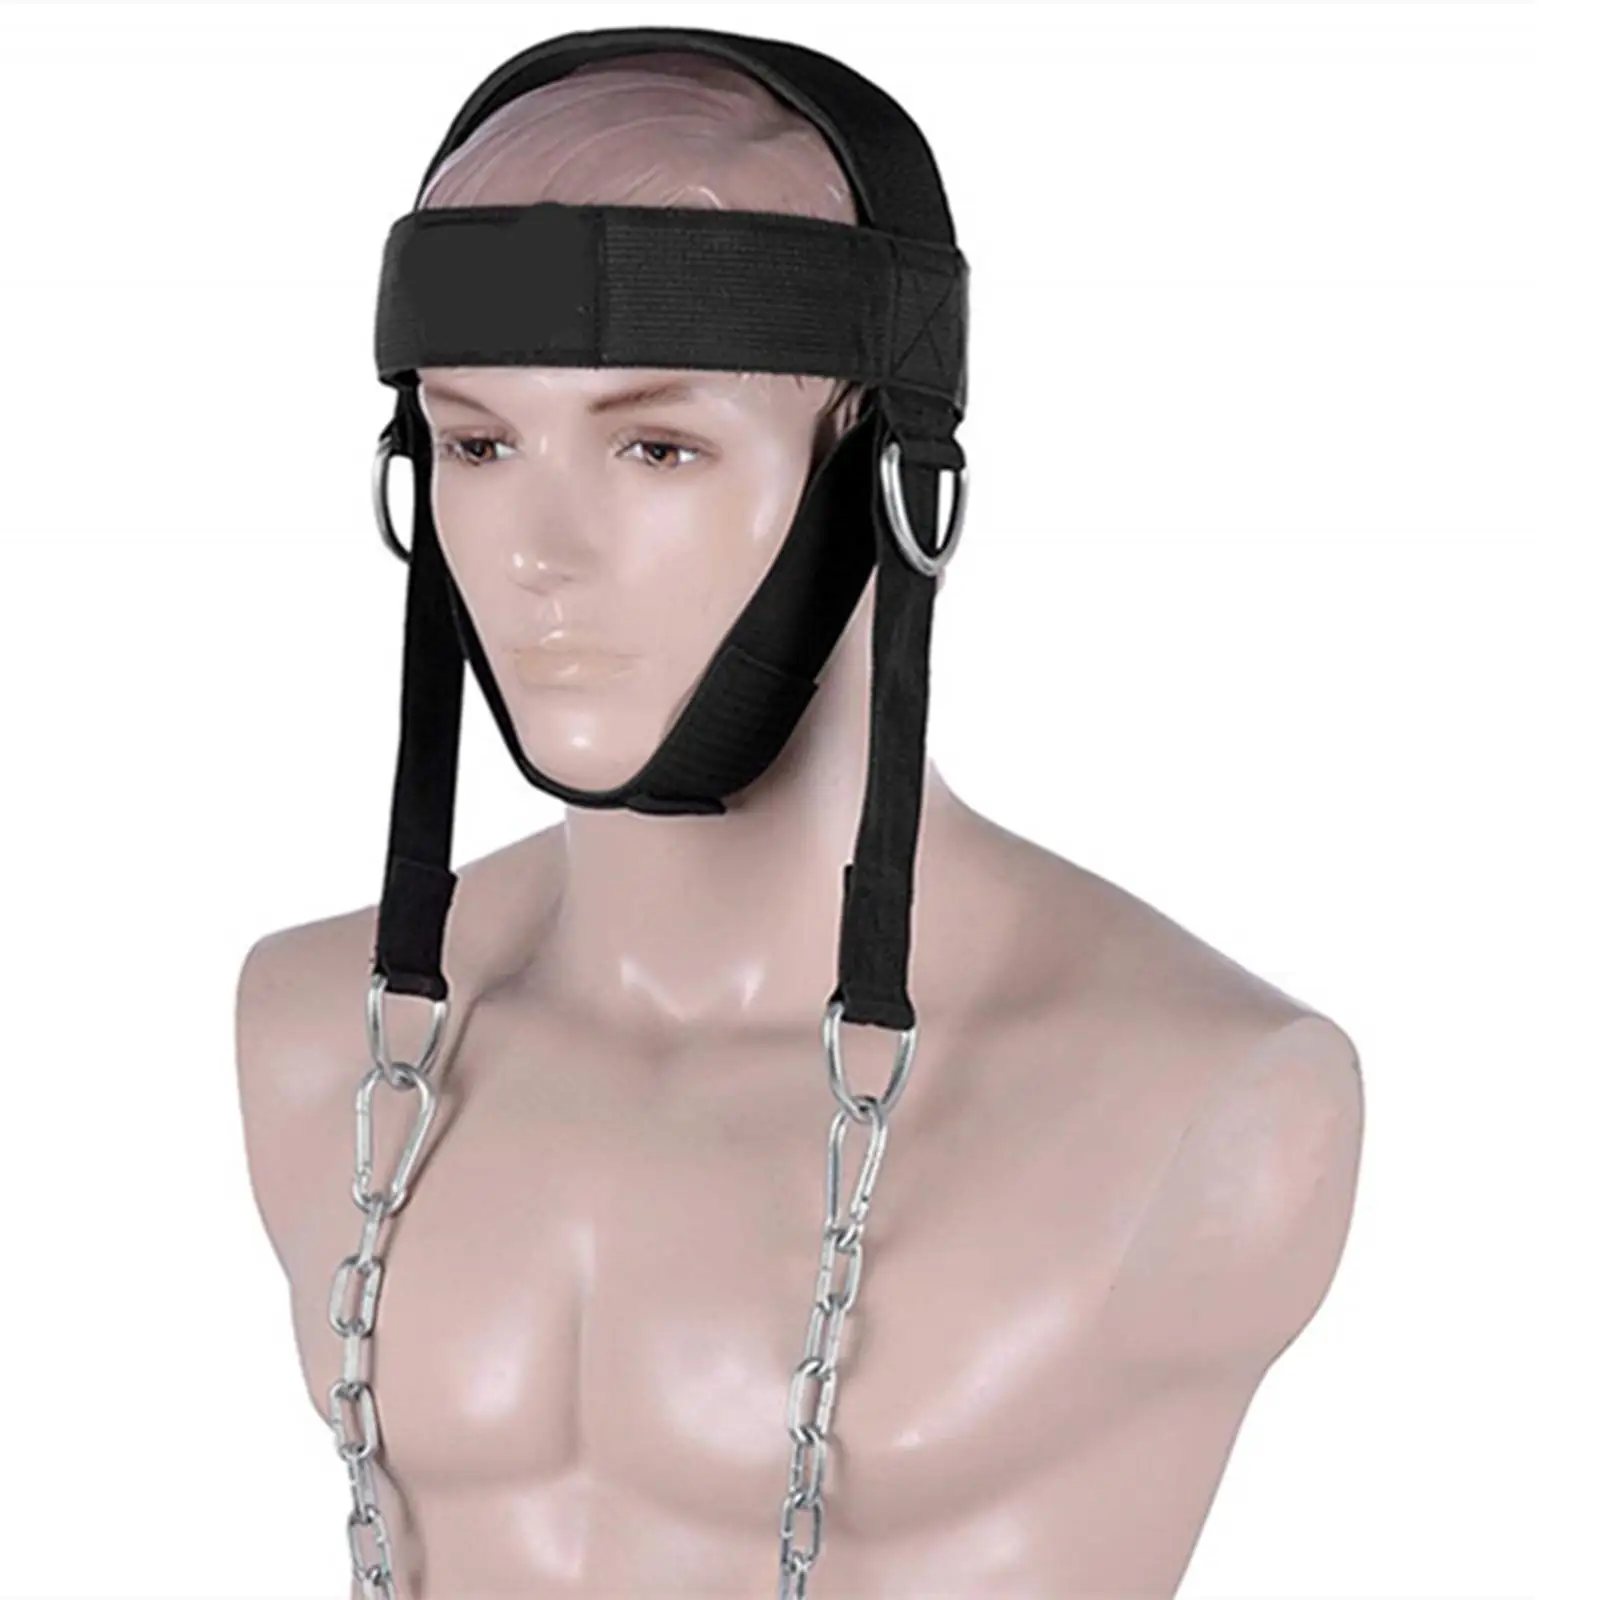 1x Head Neck Harness Oxford Cloth for Weight Lifting Home Fitness Training